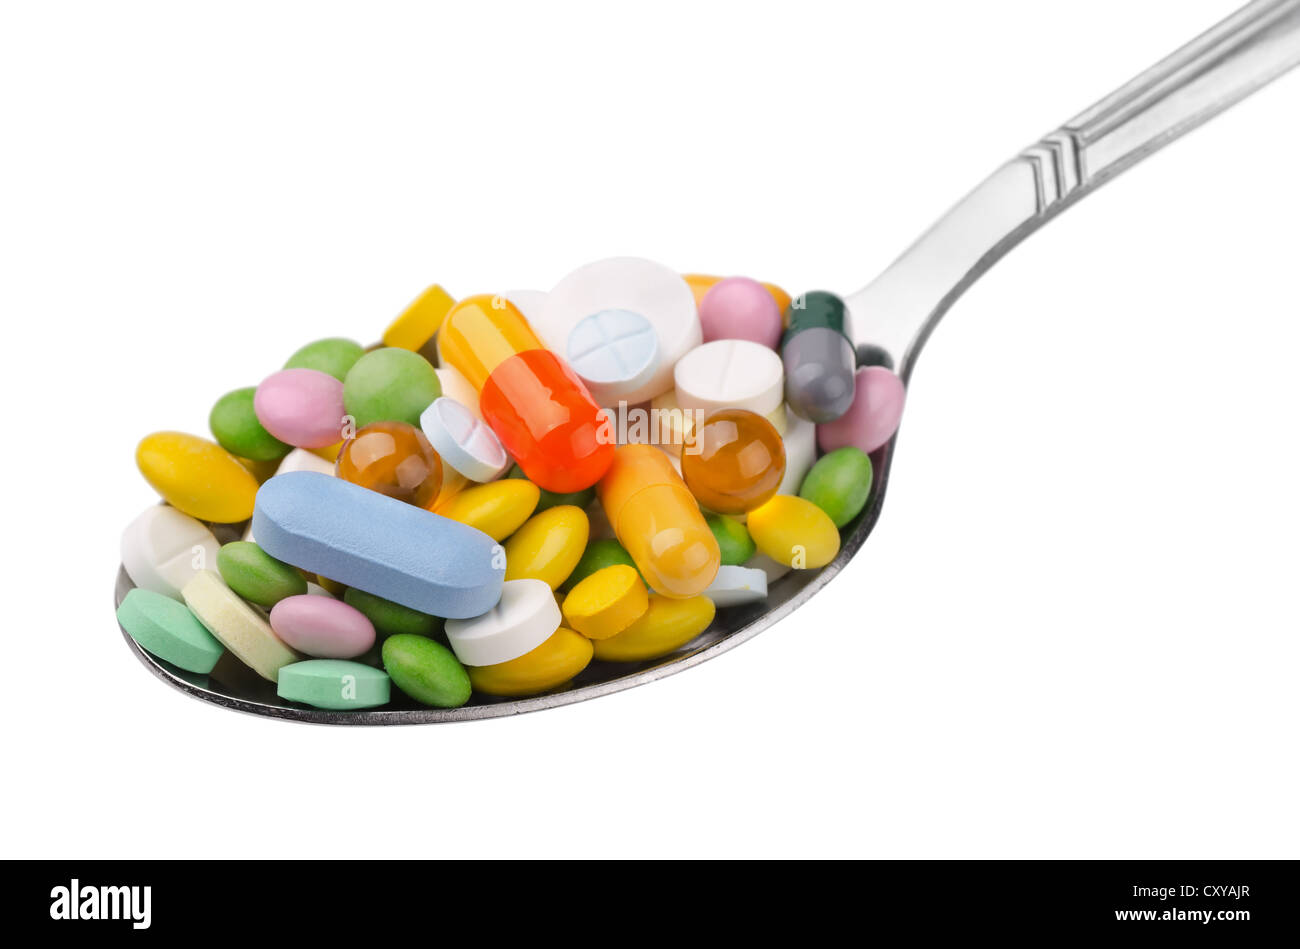 Spoon full of various colorful drugs isolated on white Stock Photo